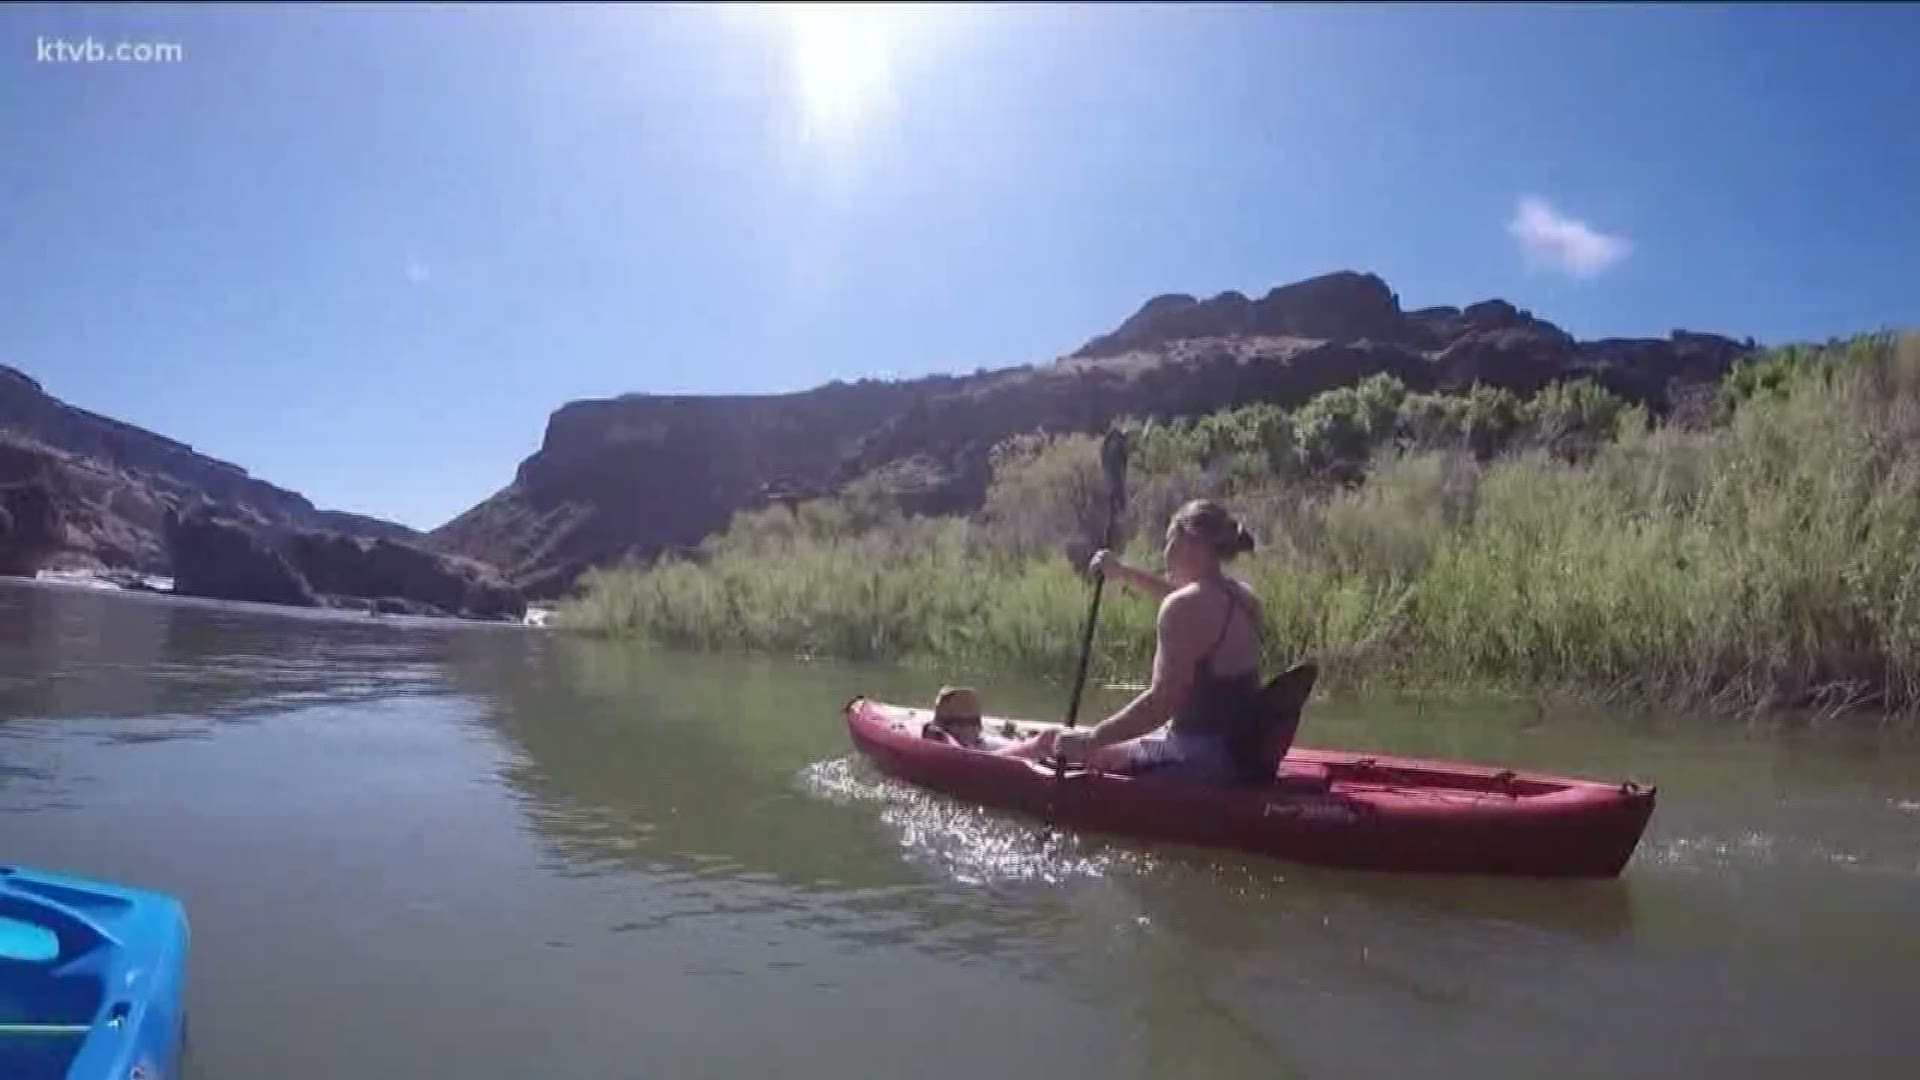 There are several ways on the water to explore canyon.